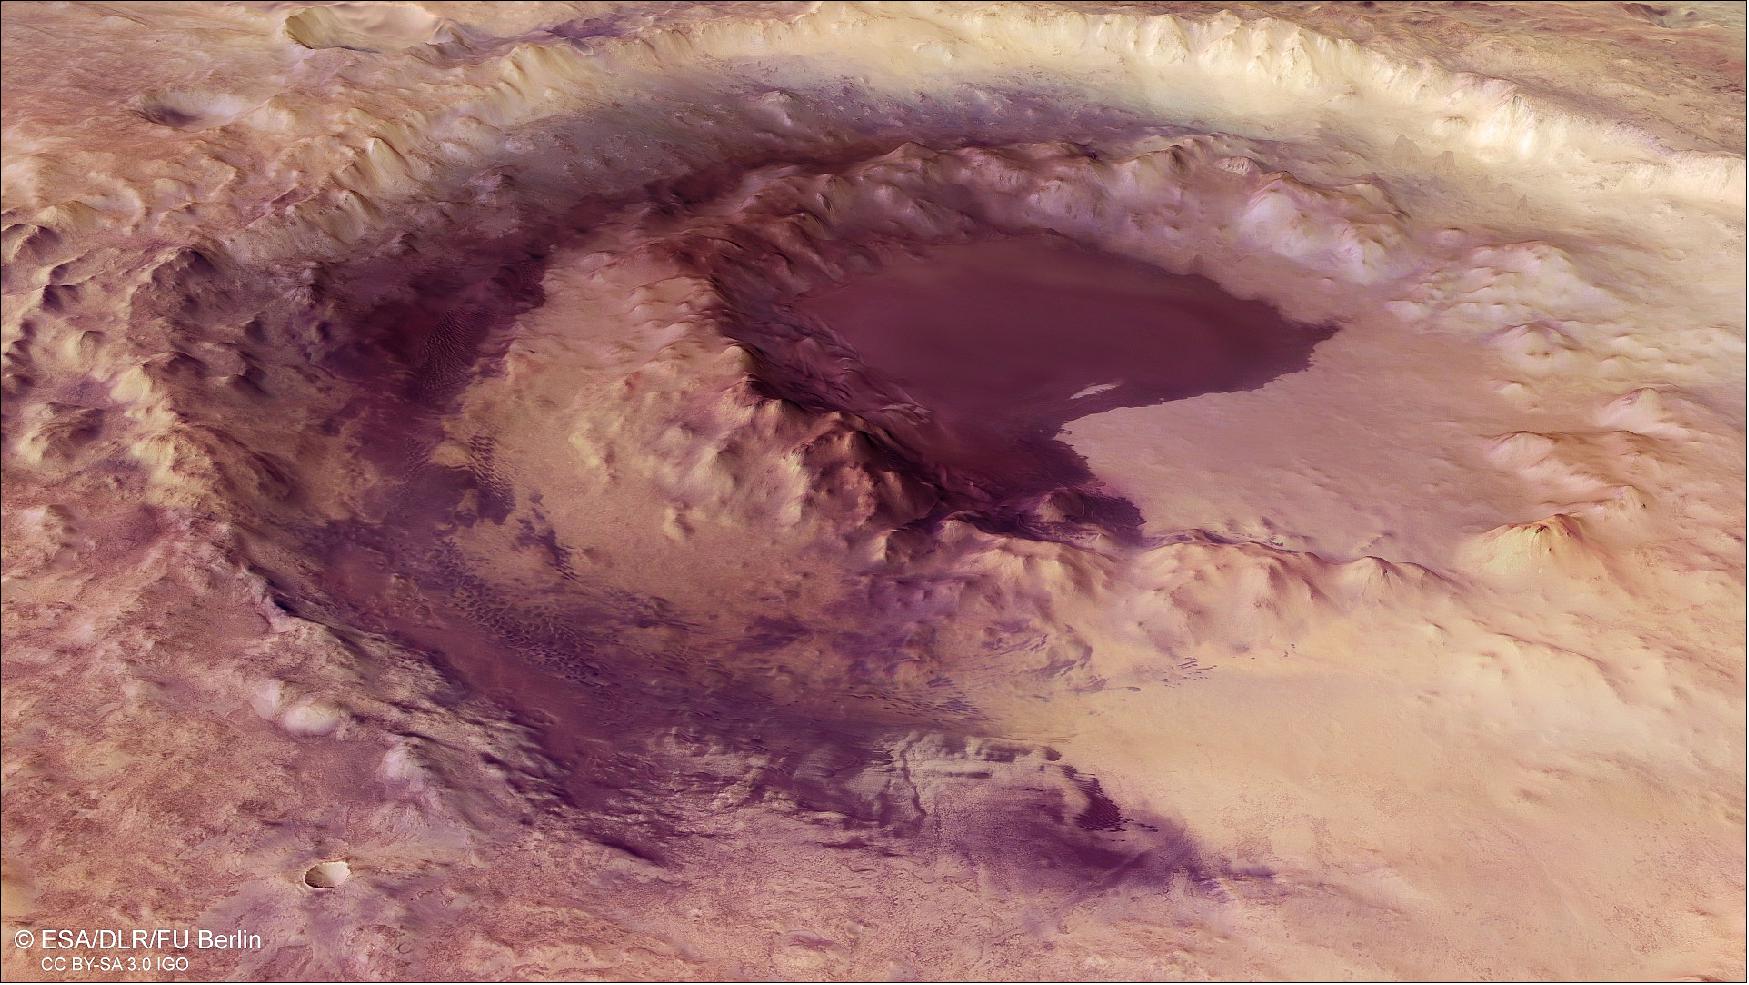 Figure 35: This image from ESA's Mars Express shows Lowell crater on Mars. This oblique perspective view was generated using a digital terrain model and Mars Express data gathered during orbits 2640, 2662, 2684, 16895, 18910, 18977, and 18984 by the spacecraft's High Resolution Stereo Camera (HRSC). The ground resolution is approximately 50 m/pixel and the images cover a region from 274.5º to 283º East and 49º to 54.5º South. This image was created using data from the nadir and color channels of the HRSC. The nadir channel is aligned perpendicular to the surface of Mars, as if looking straight down at the surface (image credit: ESA/DLR/FU Berlin, CC BY-SA 3.0 IGO)